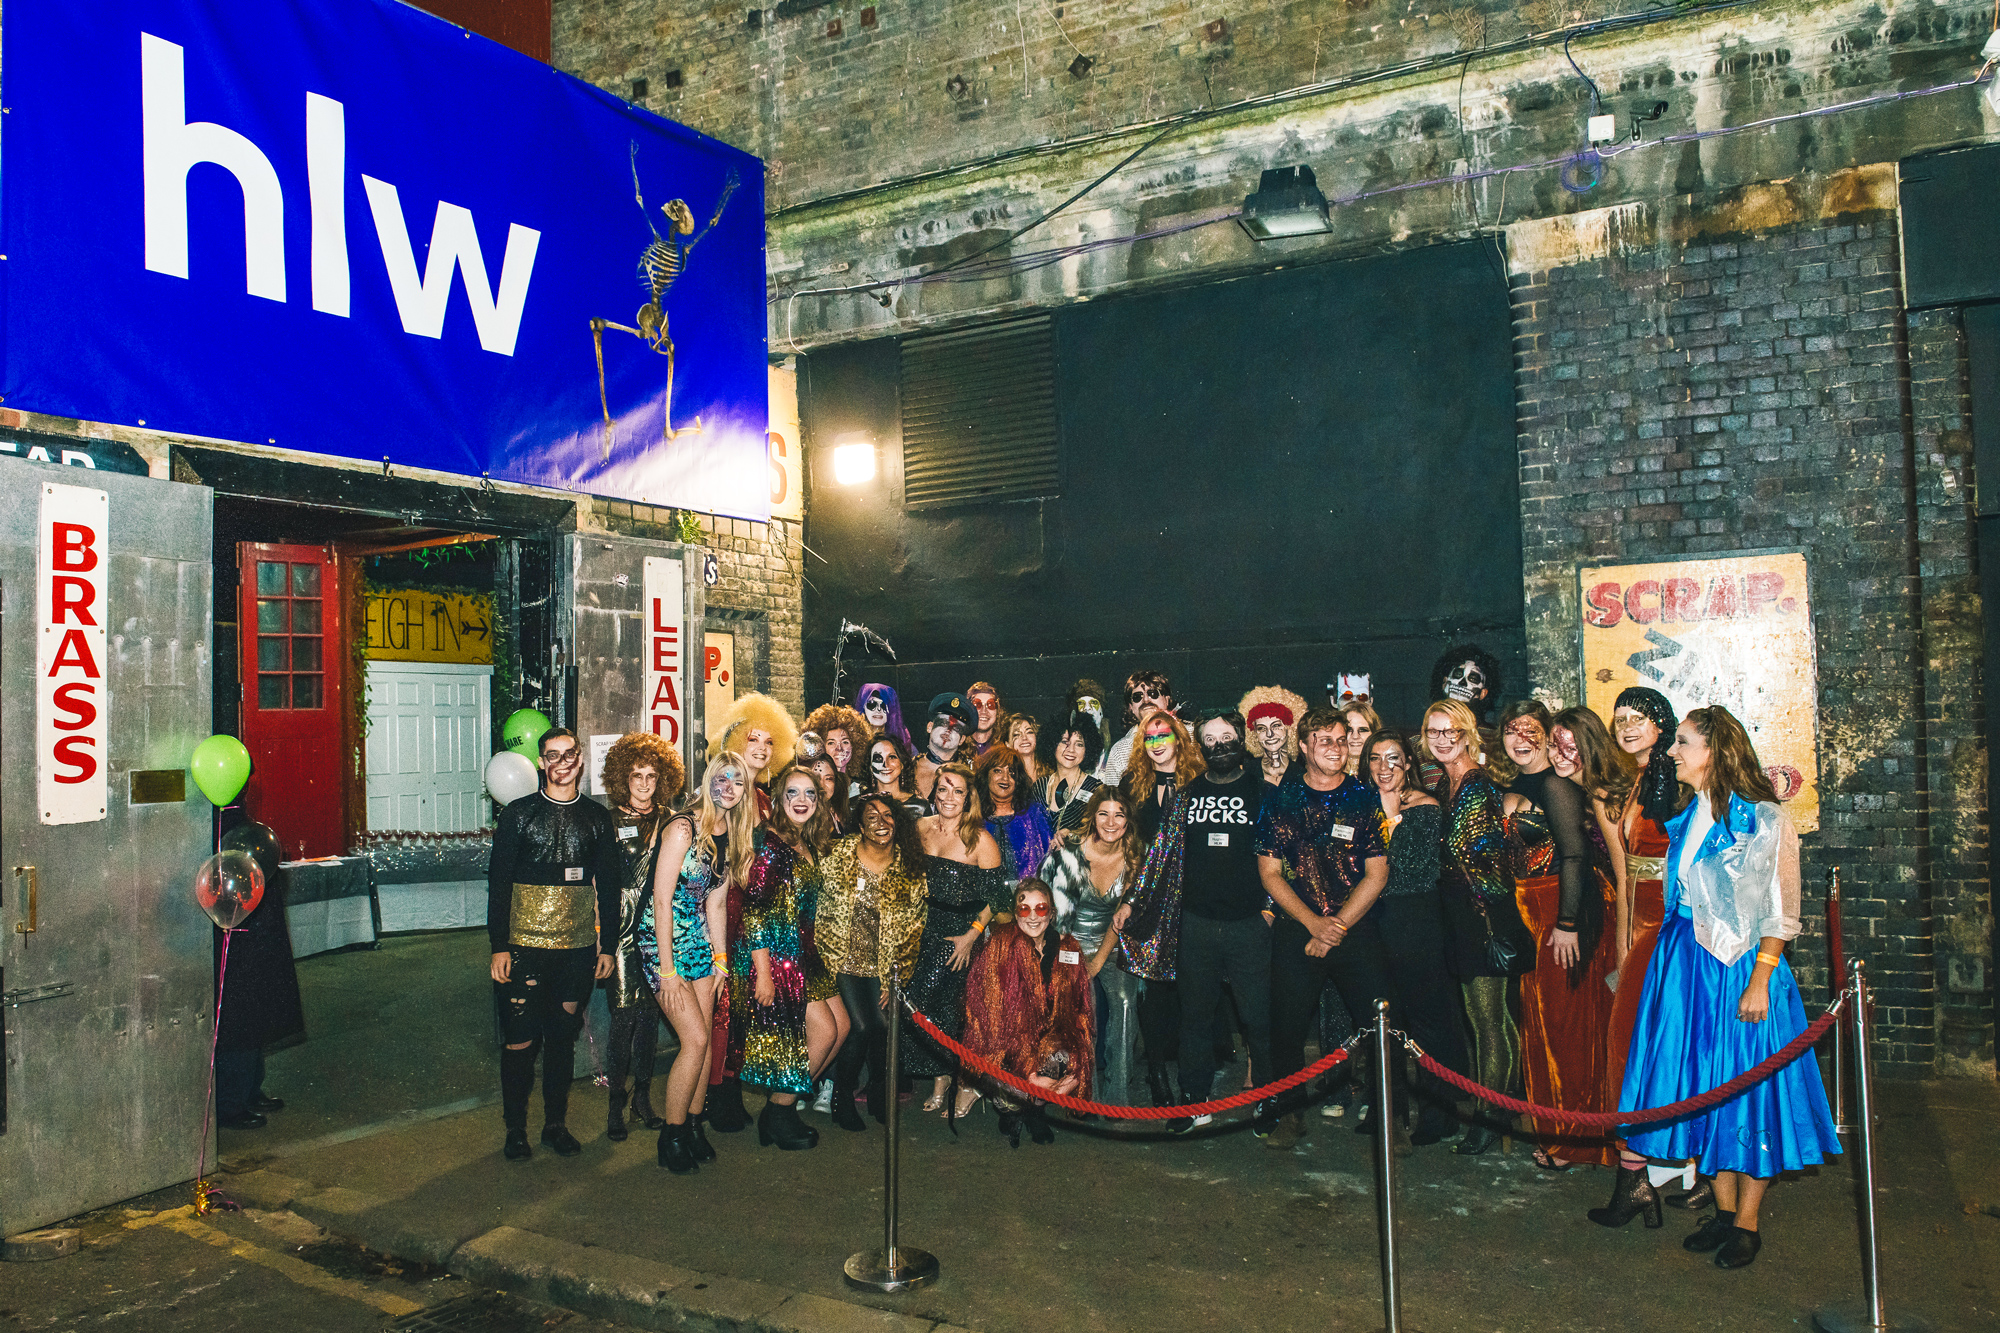 Large group of smiling people in diverse and colorful costumes gathered for a festive event, with a 'hlw' sign and urban decor setting the backdrop.